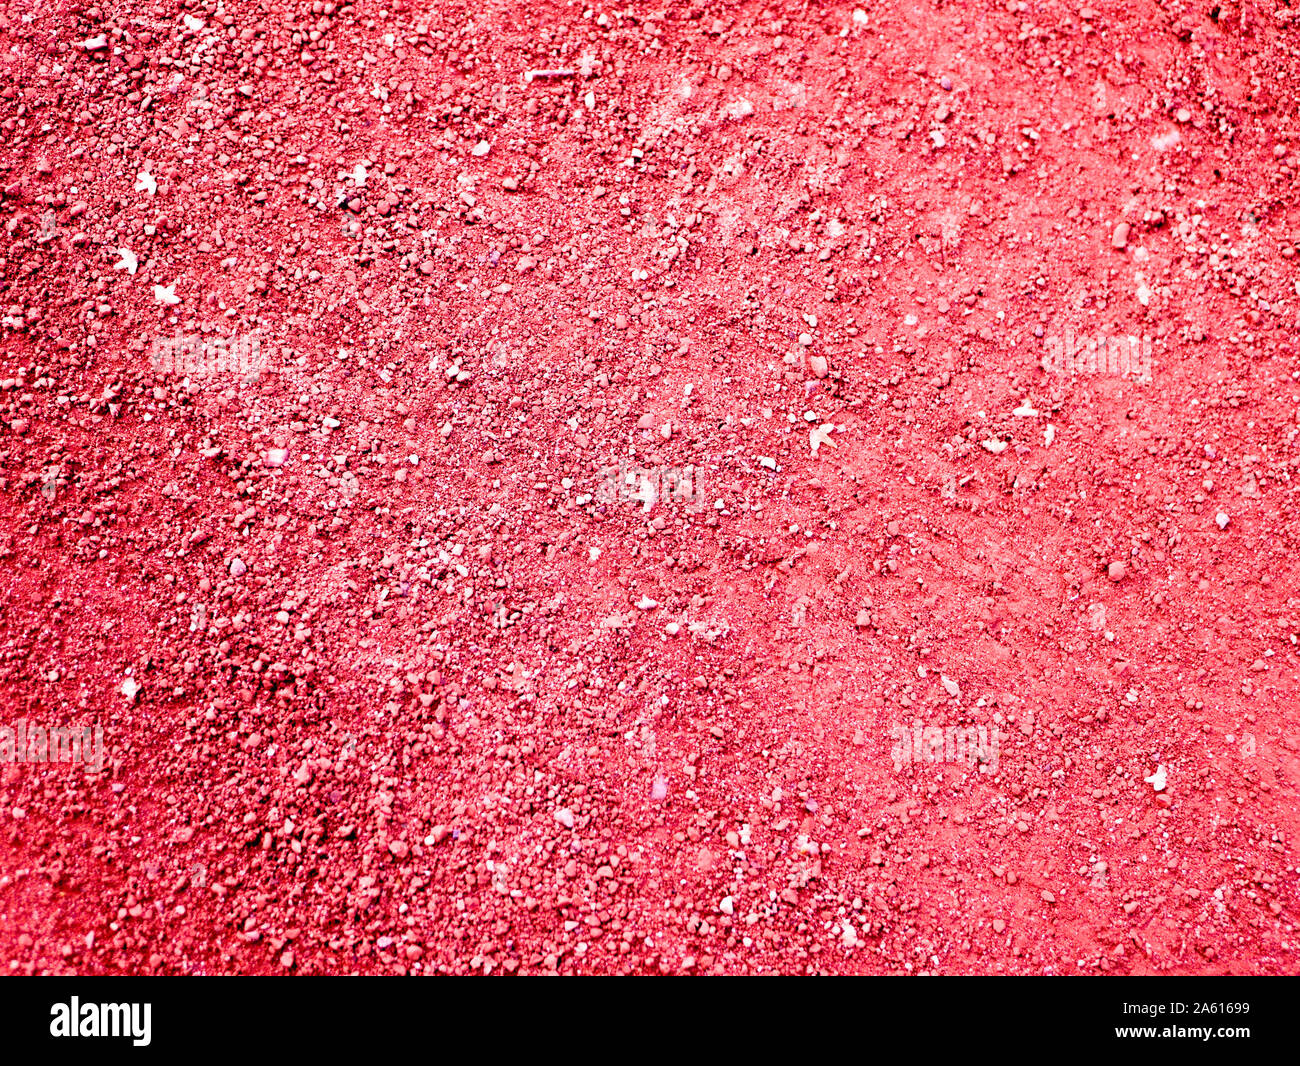 red sand close up. sand texture orange treadmill. Texture of dry red clay with stones Stock Photo